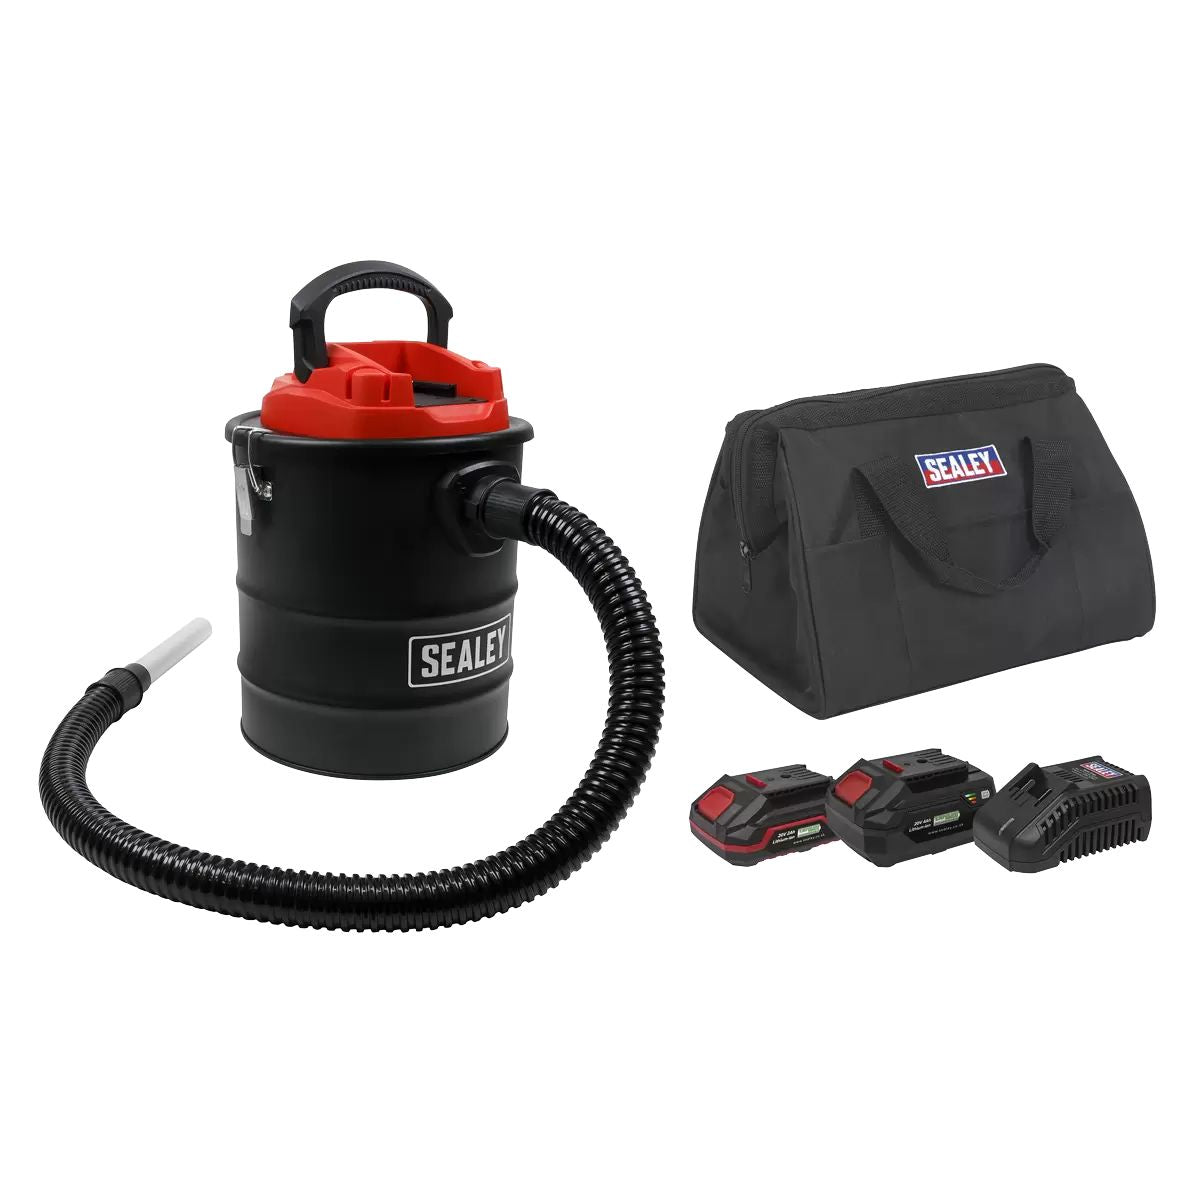 Sealey CP20VAVKIT 20V Handheld Ash 15L Vacuum Cleaner Kit 2 Batteries with charger